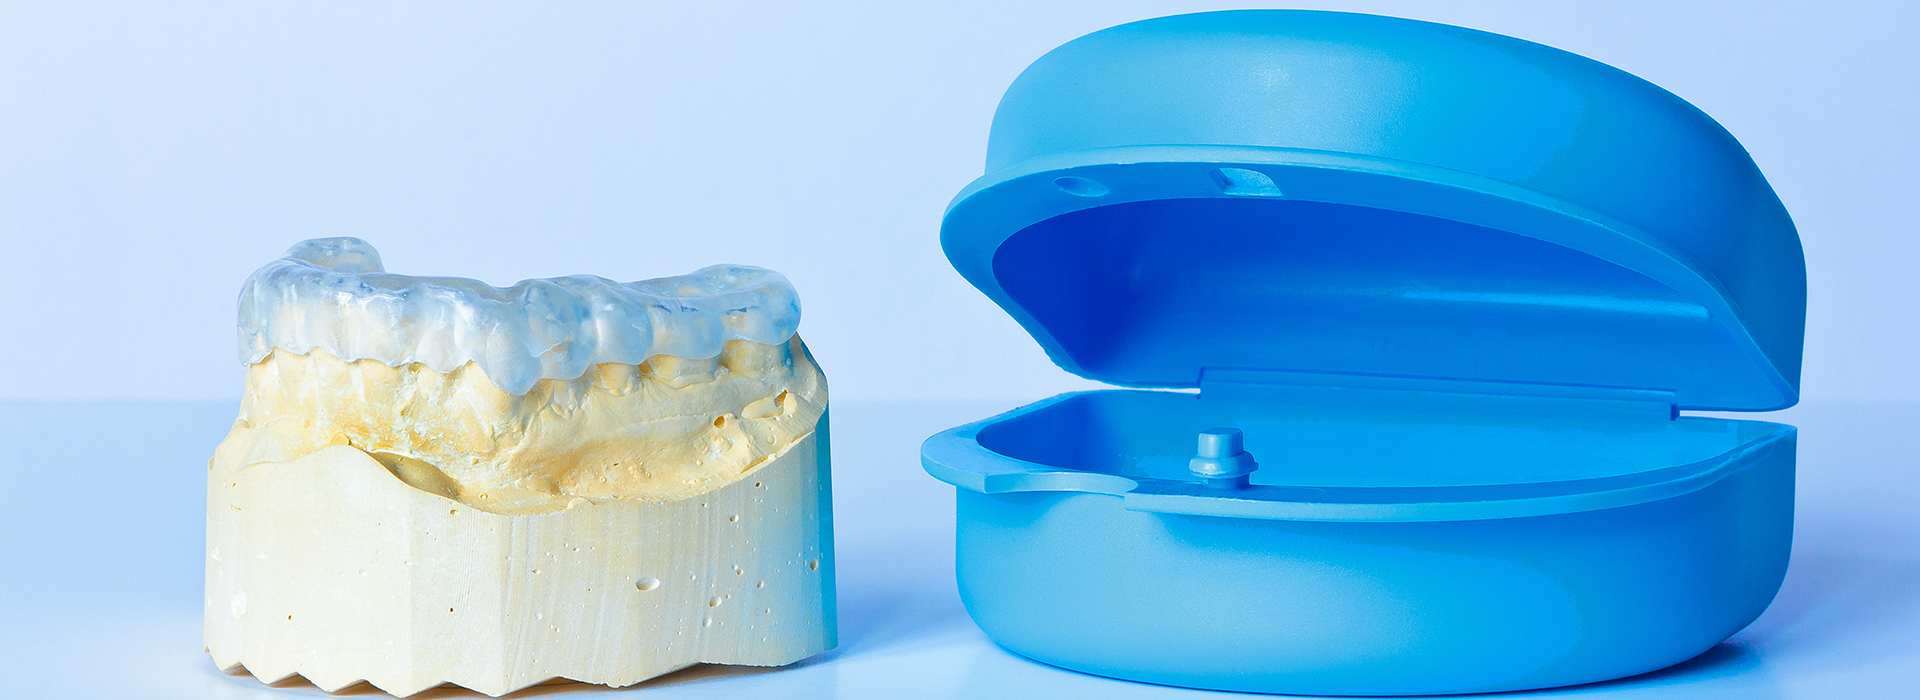 Dental implant components displayed side by side, including a blue surgical guide and a yellow abutment.